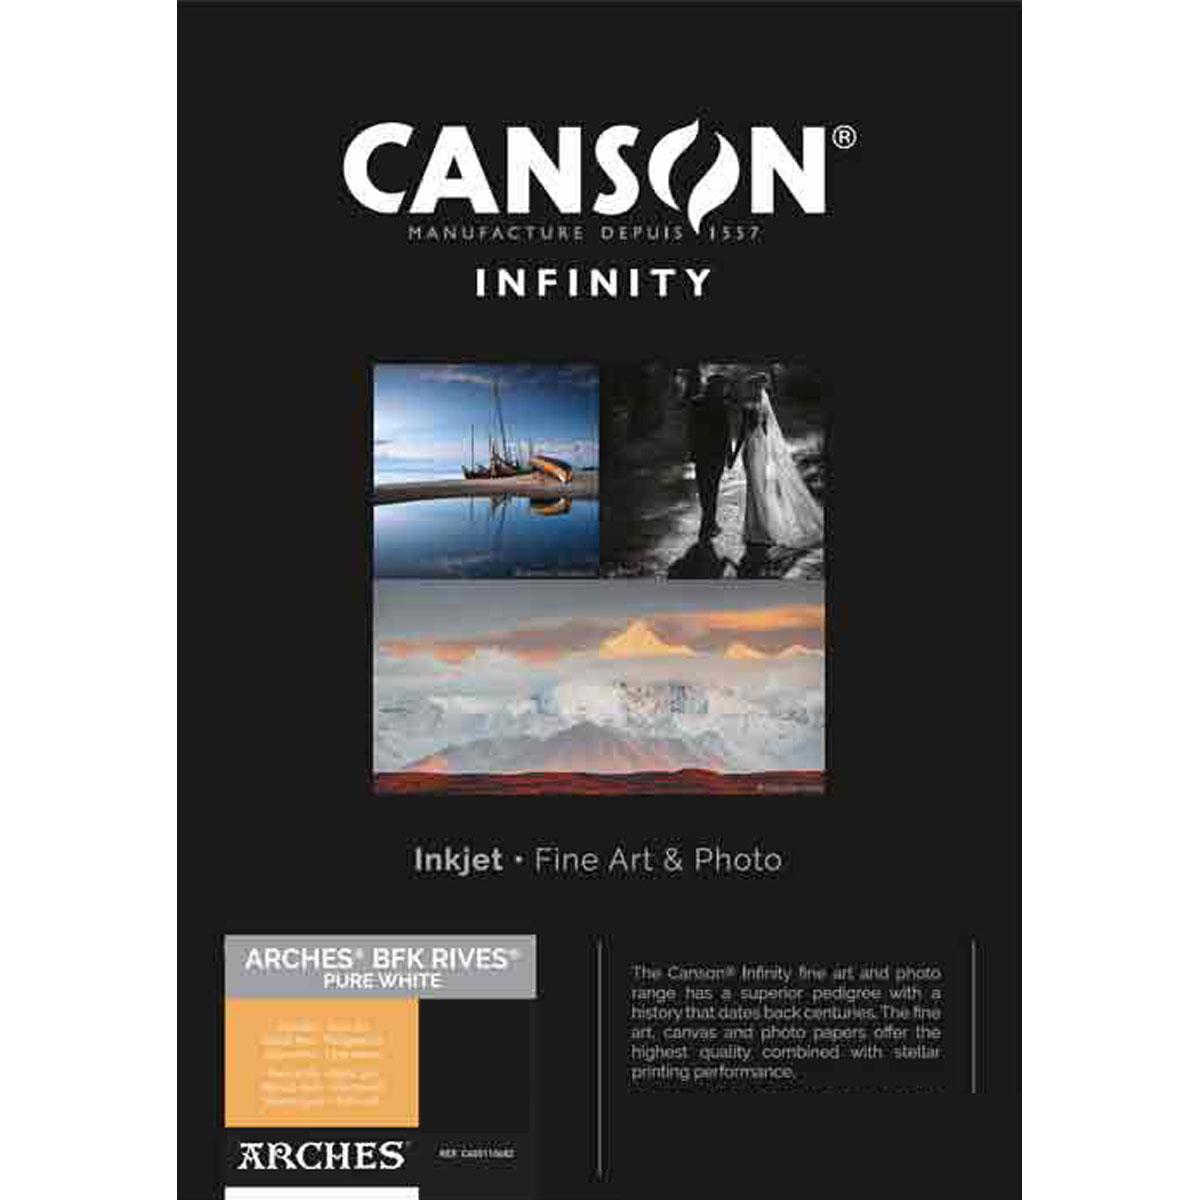 Image of Canson Infinity ARCHES BFK Rives Pure White Matte Inkjet Paper